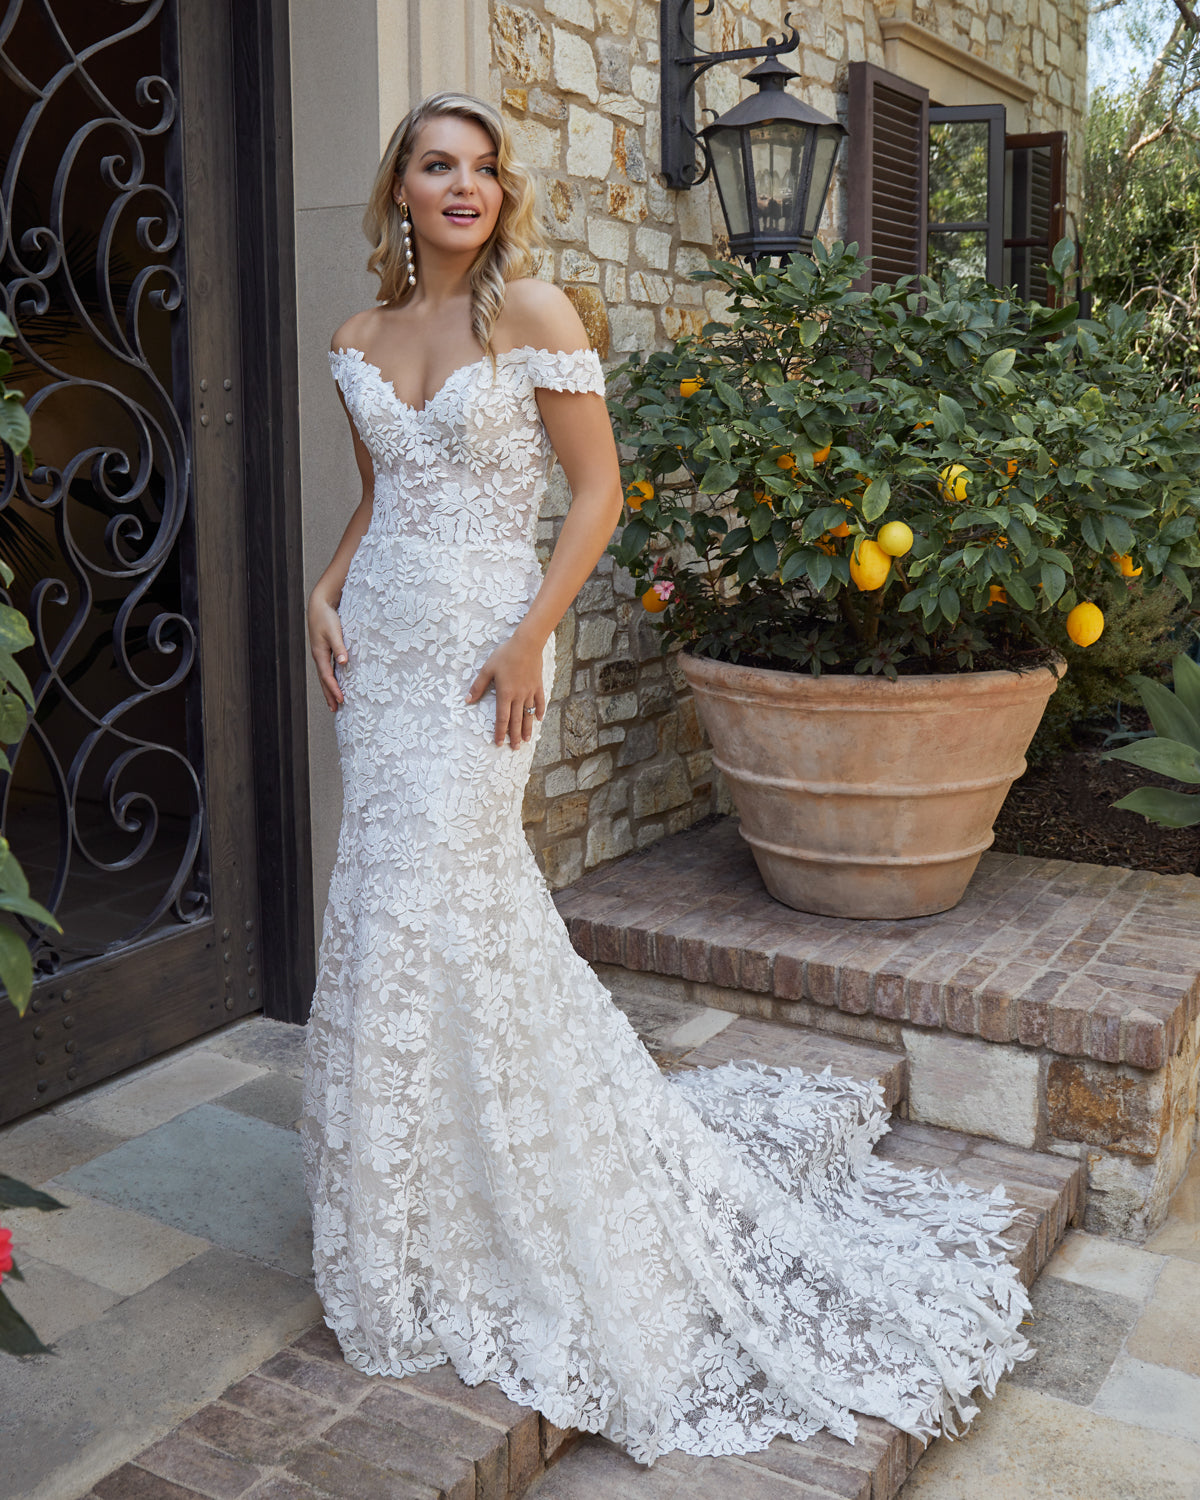 Casablanca Bridal 2446 Evelyn  Modern lace meets a classic silhouette to create enchanting Style 2446. This fit and flare wedding dress features the most charming, bold overlace that sits atop Chantilly lace, silky chiffon and organza for an extra layered element of dimensional detail. Off-shoulder sleeves will give you a fanciful, flirtatious look, while a 56 to 81 inch scalloped edge train makes for that perfect back photo.  Fabric: Chantilly Lace, Organza, Silky Chiffon & Overlace